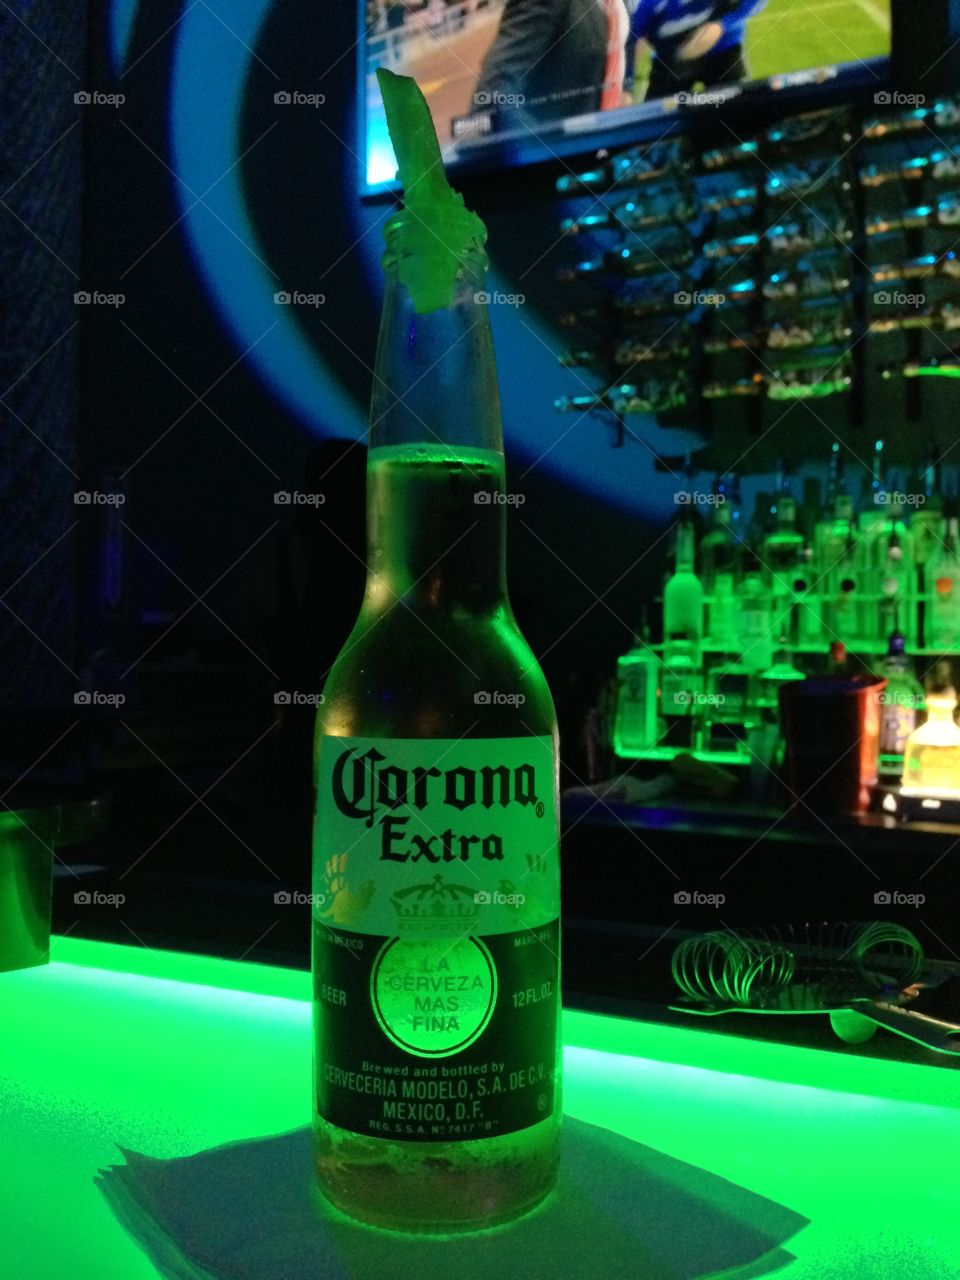 Having a drink at a local club in the early hours in Miami Florida , Corona Extra looking good with the back light 